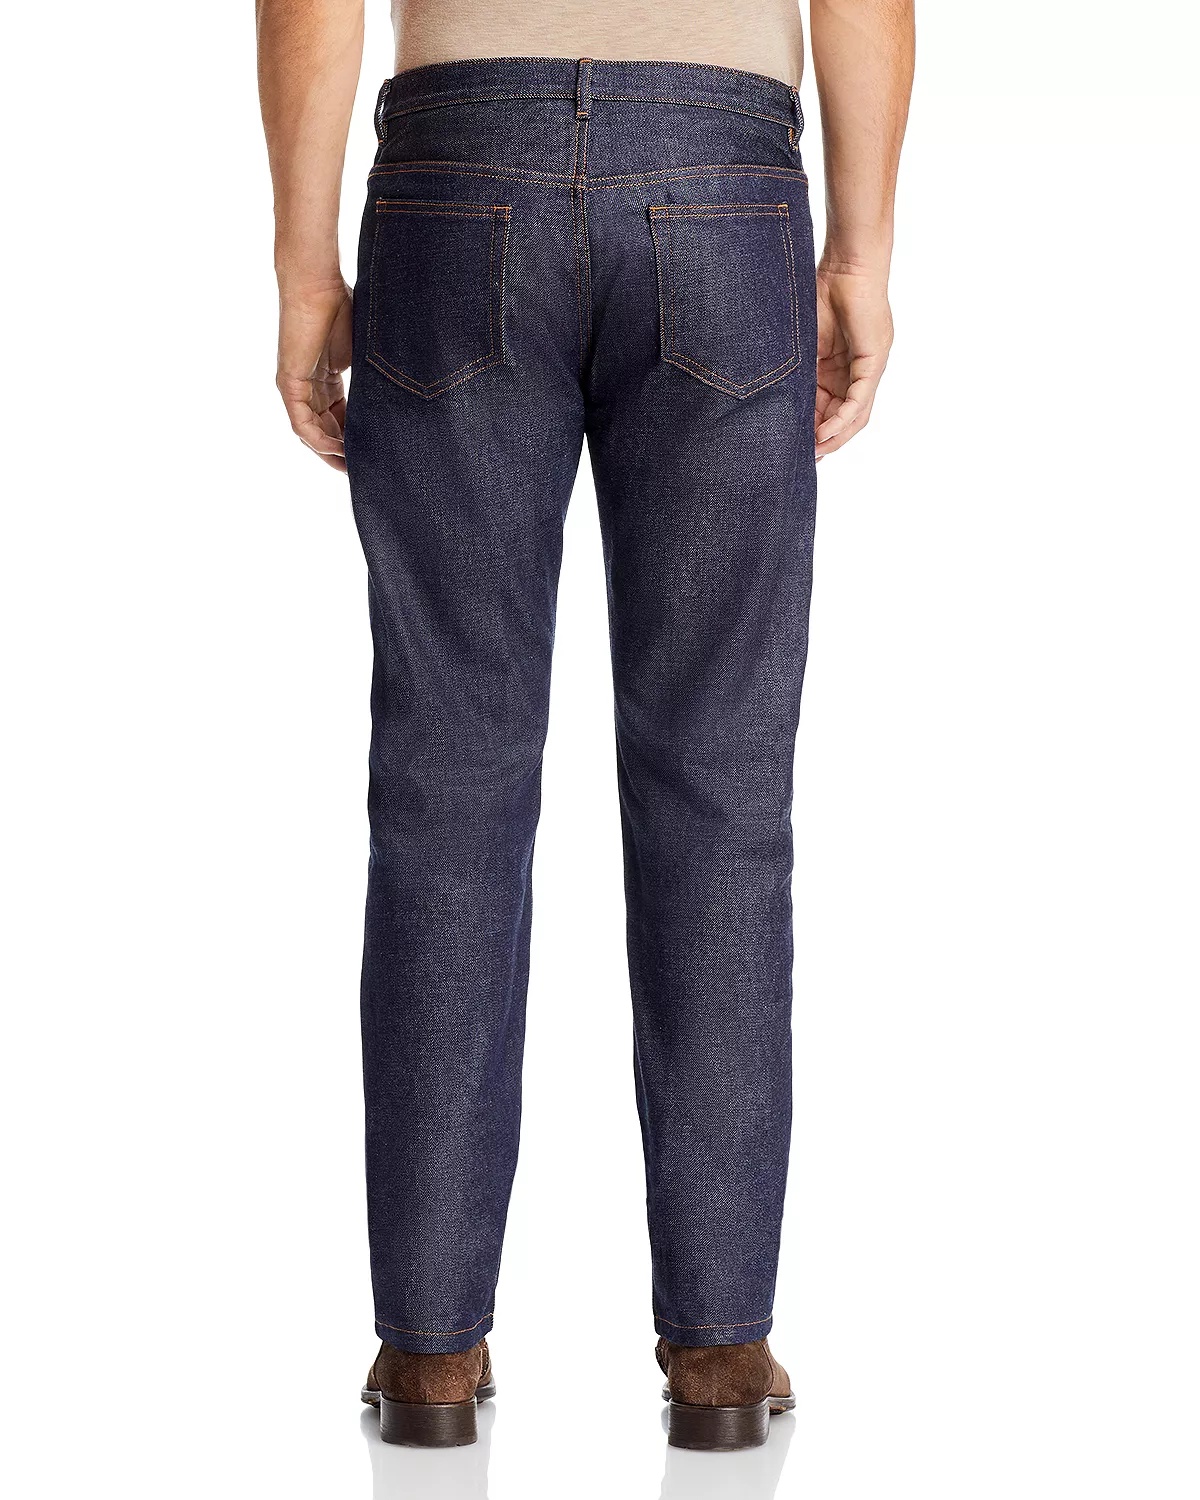 New Standard Straight Fit Jeans in Indigo - 3